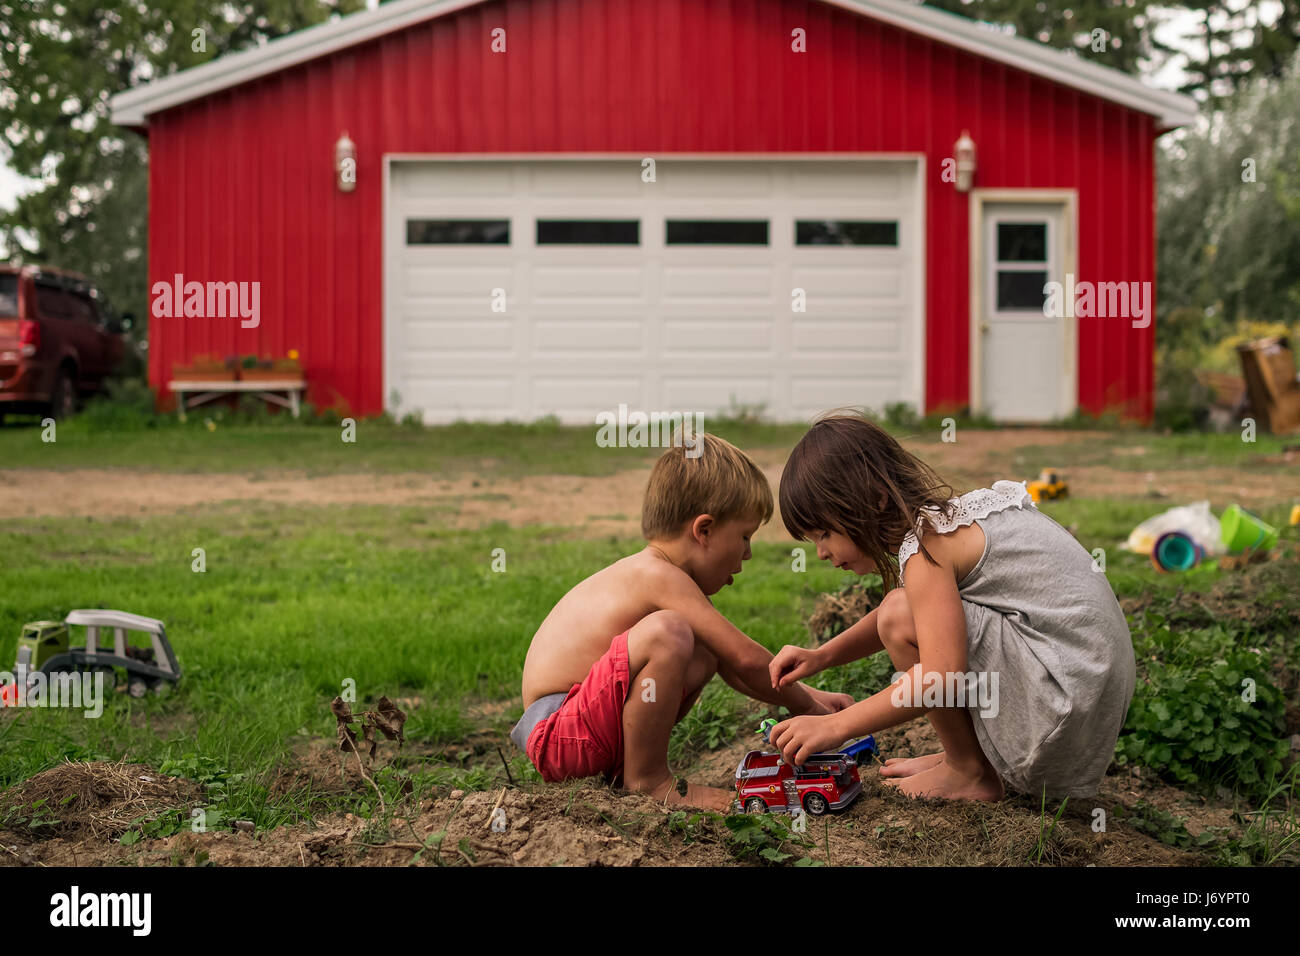 Boy and girl playing with toy cars Stock Photo